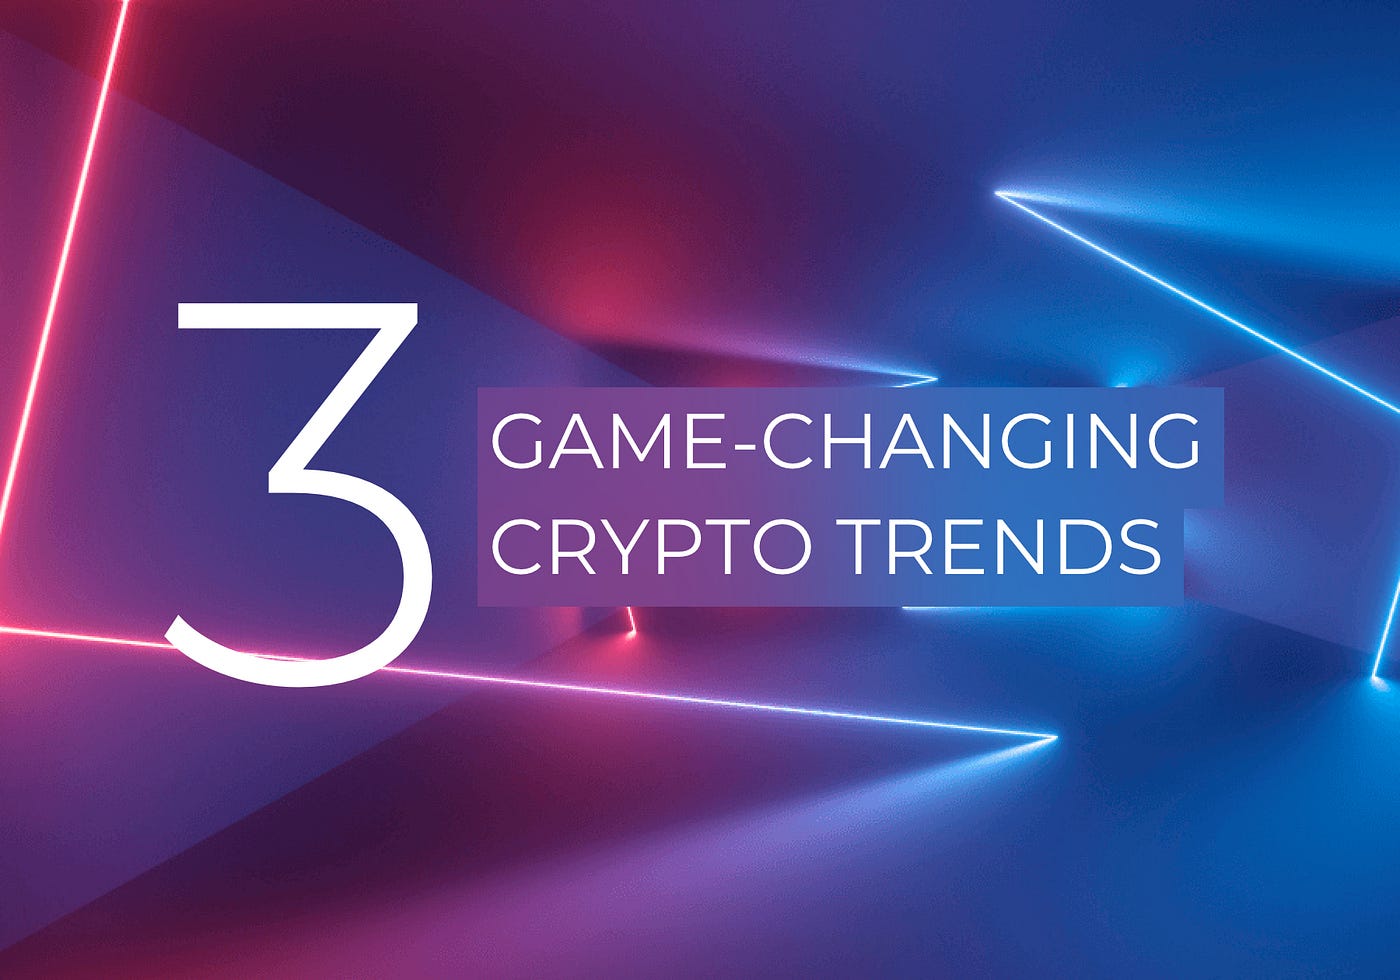 Metaverse, NFTs, and DeFi: 3 Game-Changing Crypto Trends ...